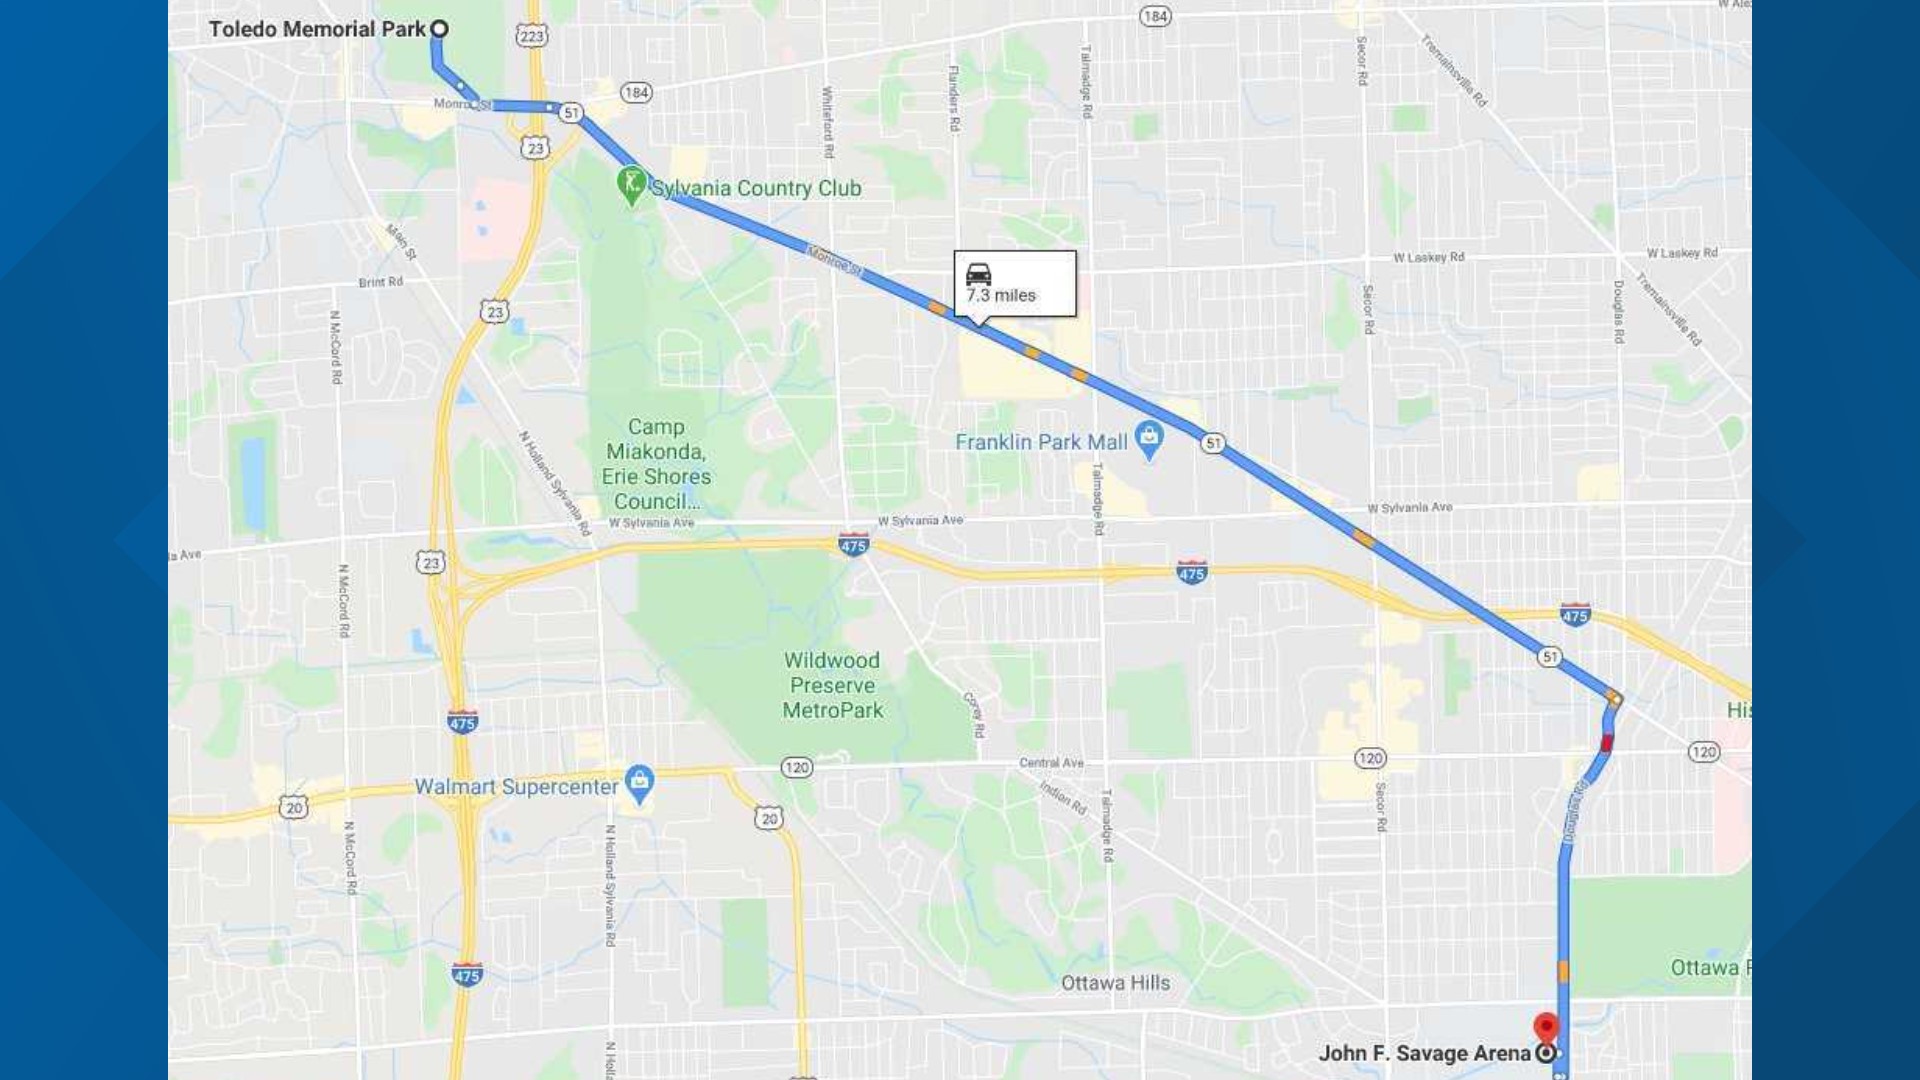 If you want to show your support, you can begin to line the route at noon. Road closures will begin at 6 a.m. and continue into late afternoon.